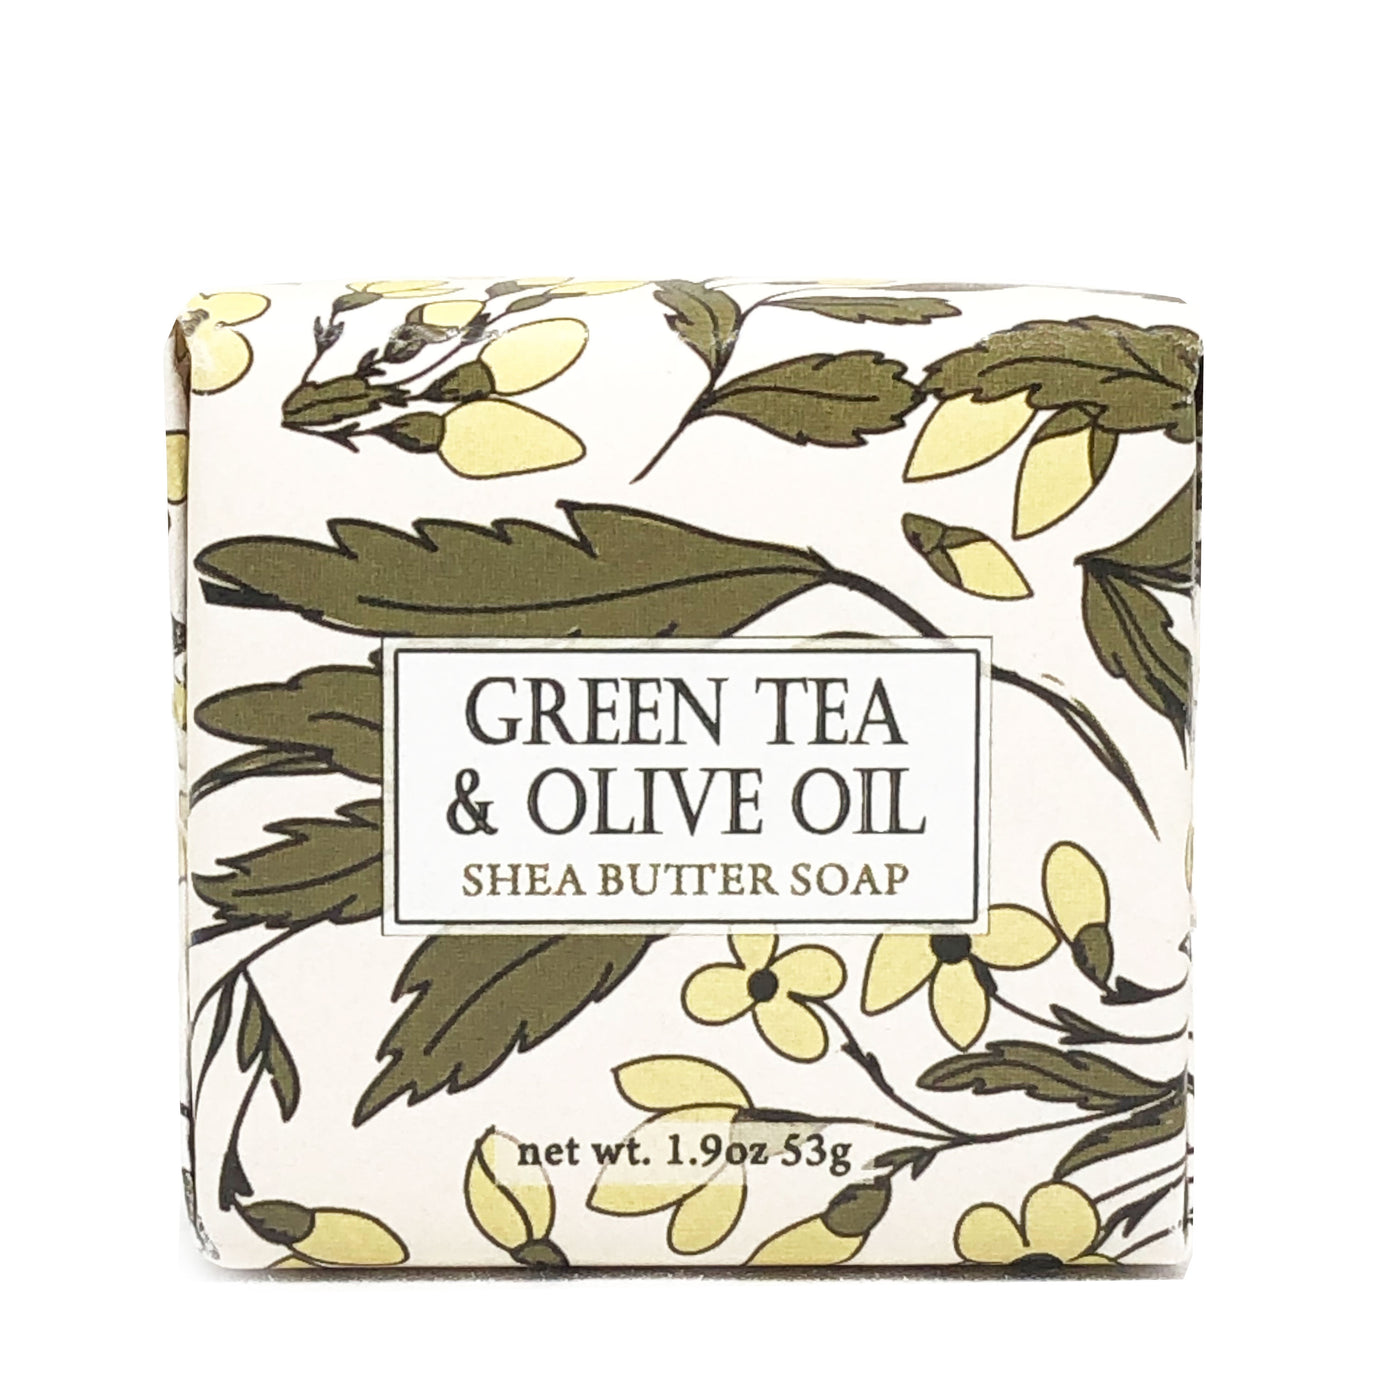 Green Tea Olive Oil Soap by Greenwich Bay Trading Co